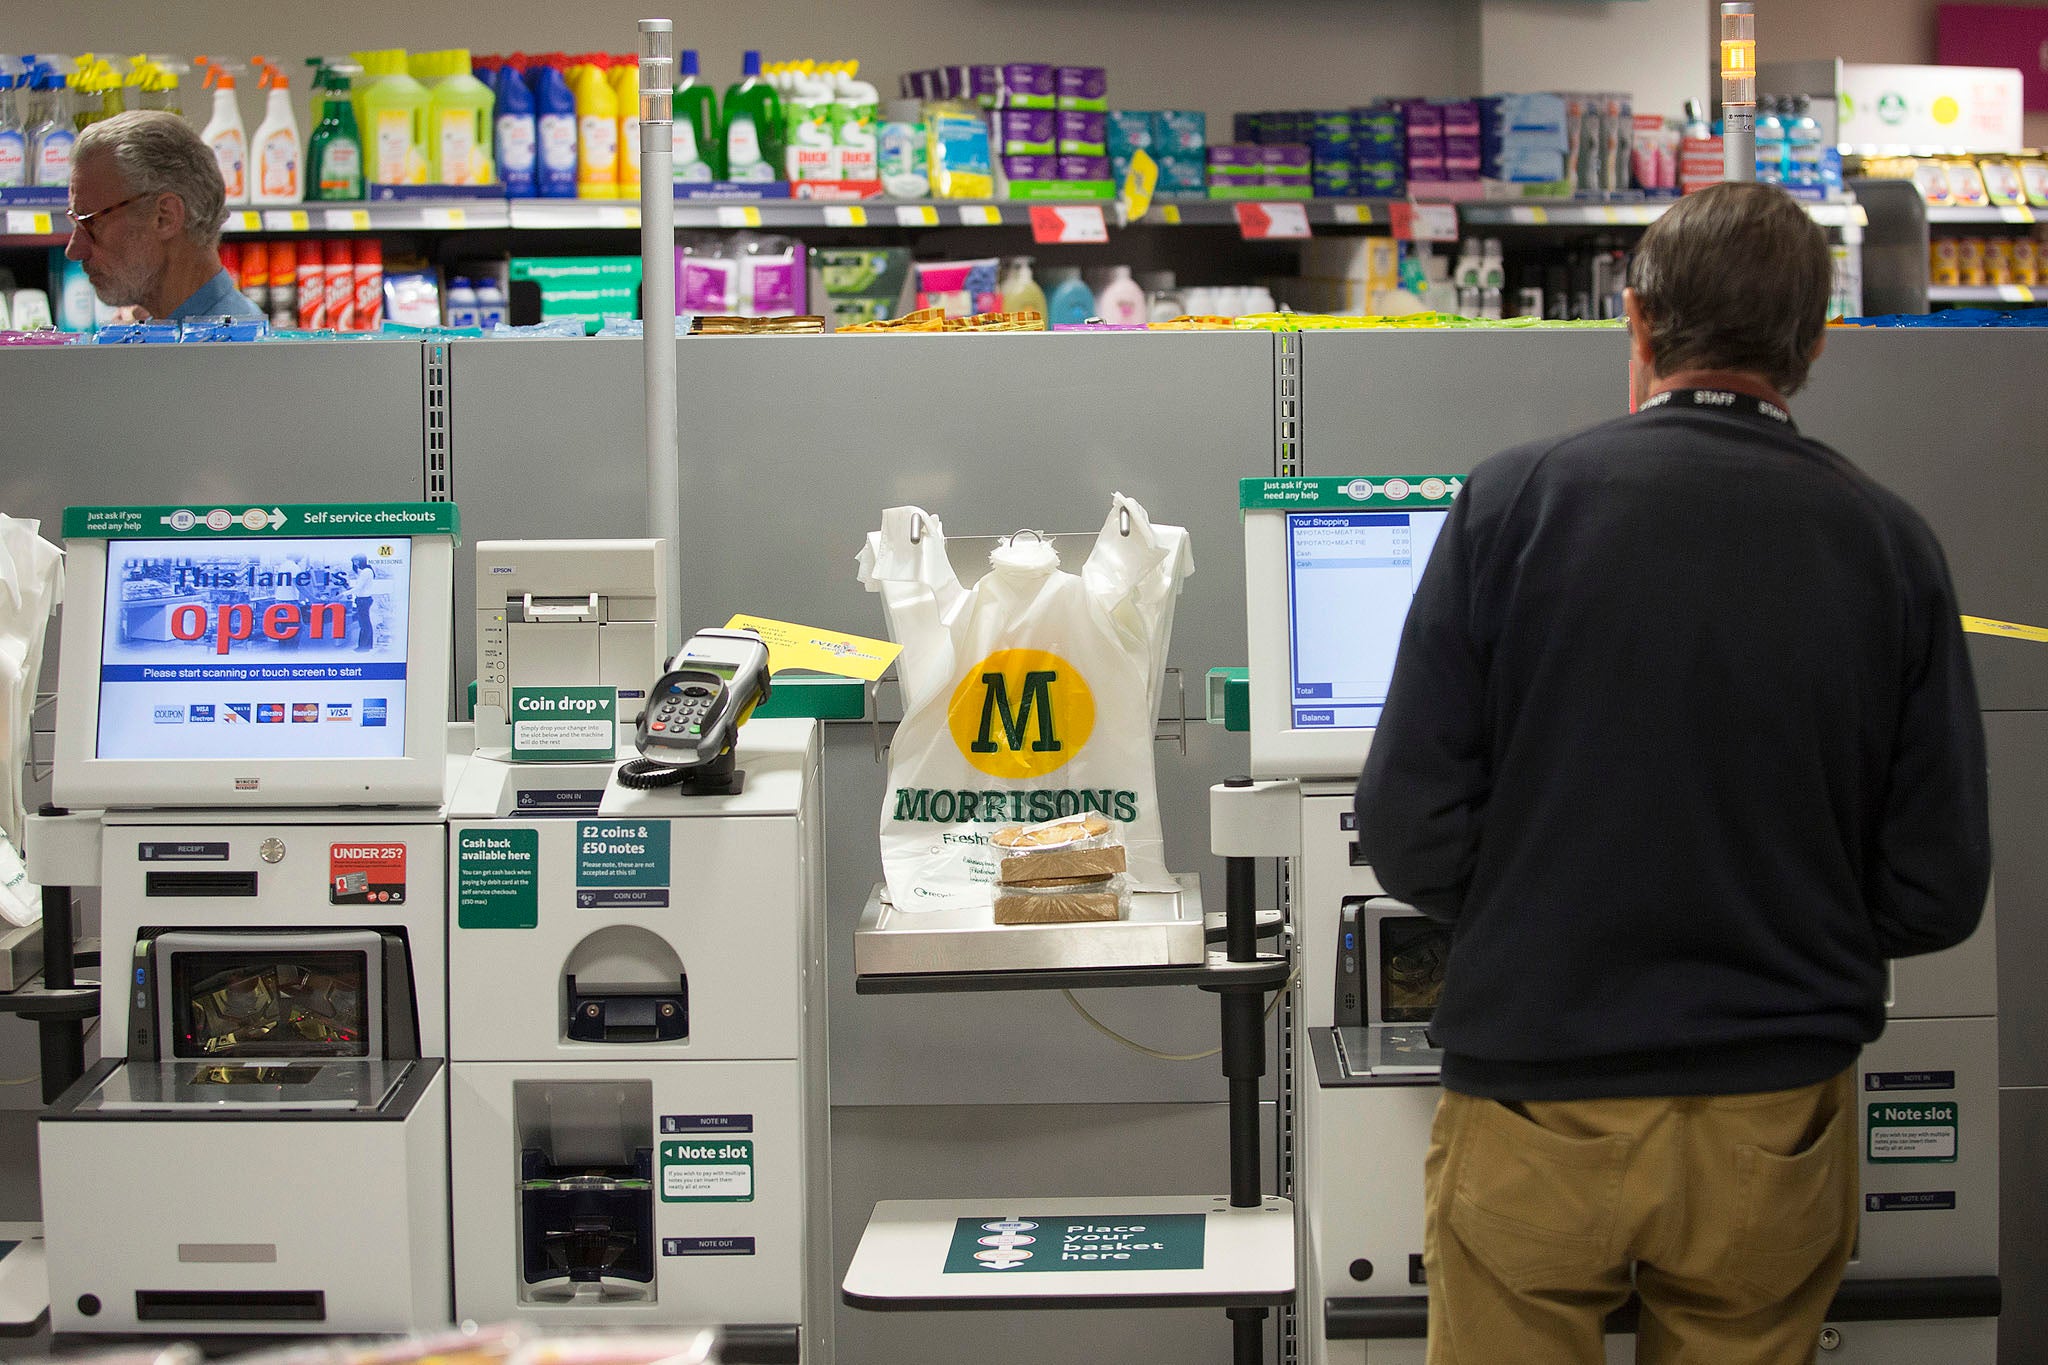 Self-service checkouts have divided the nation since they were first introduced in the 1990s